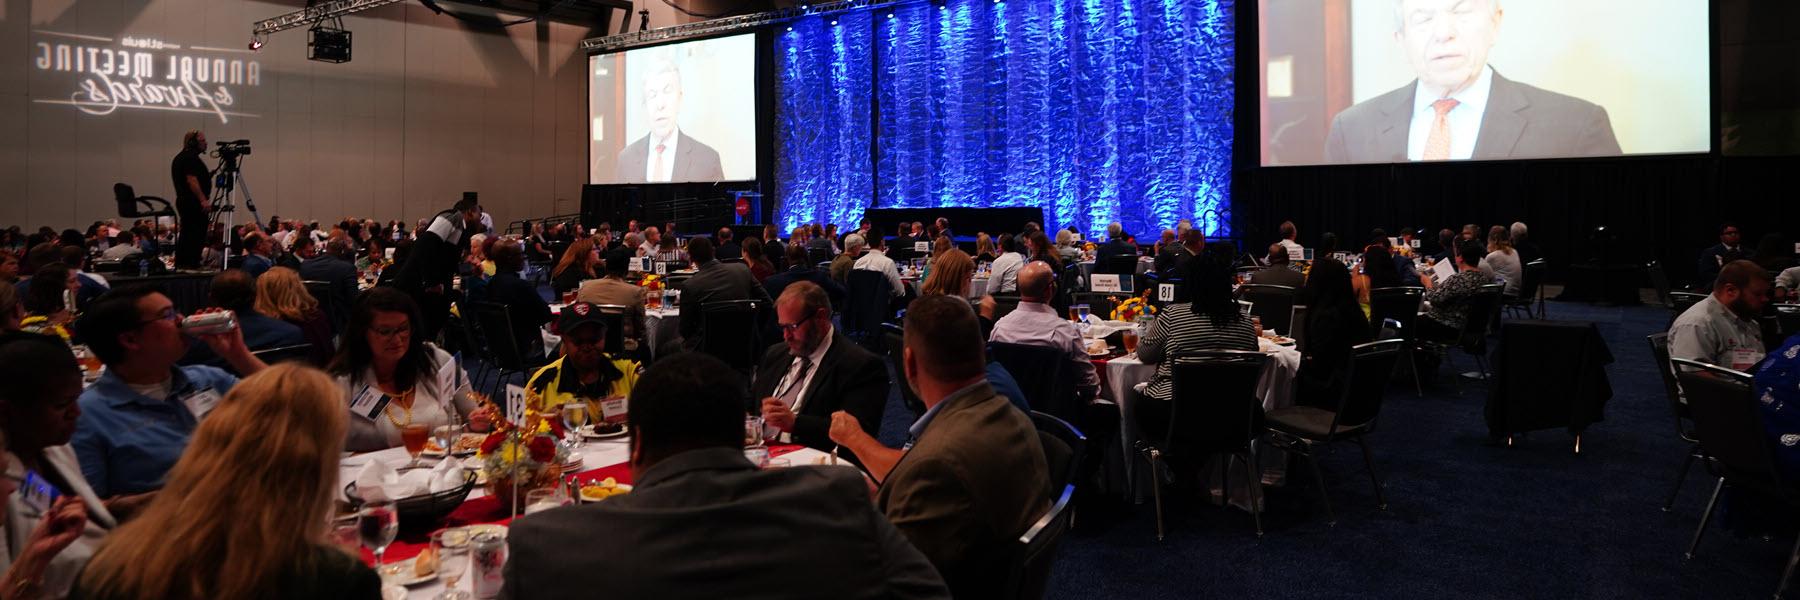 A catered event in an America's Center exhibit hall.